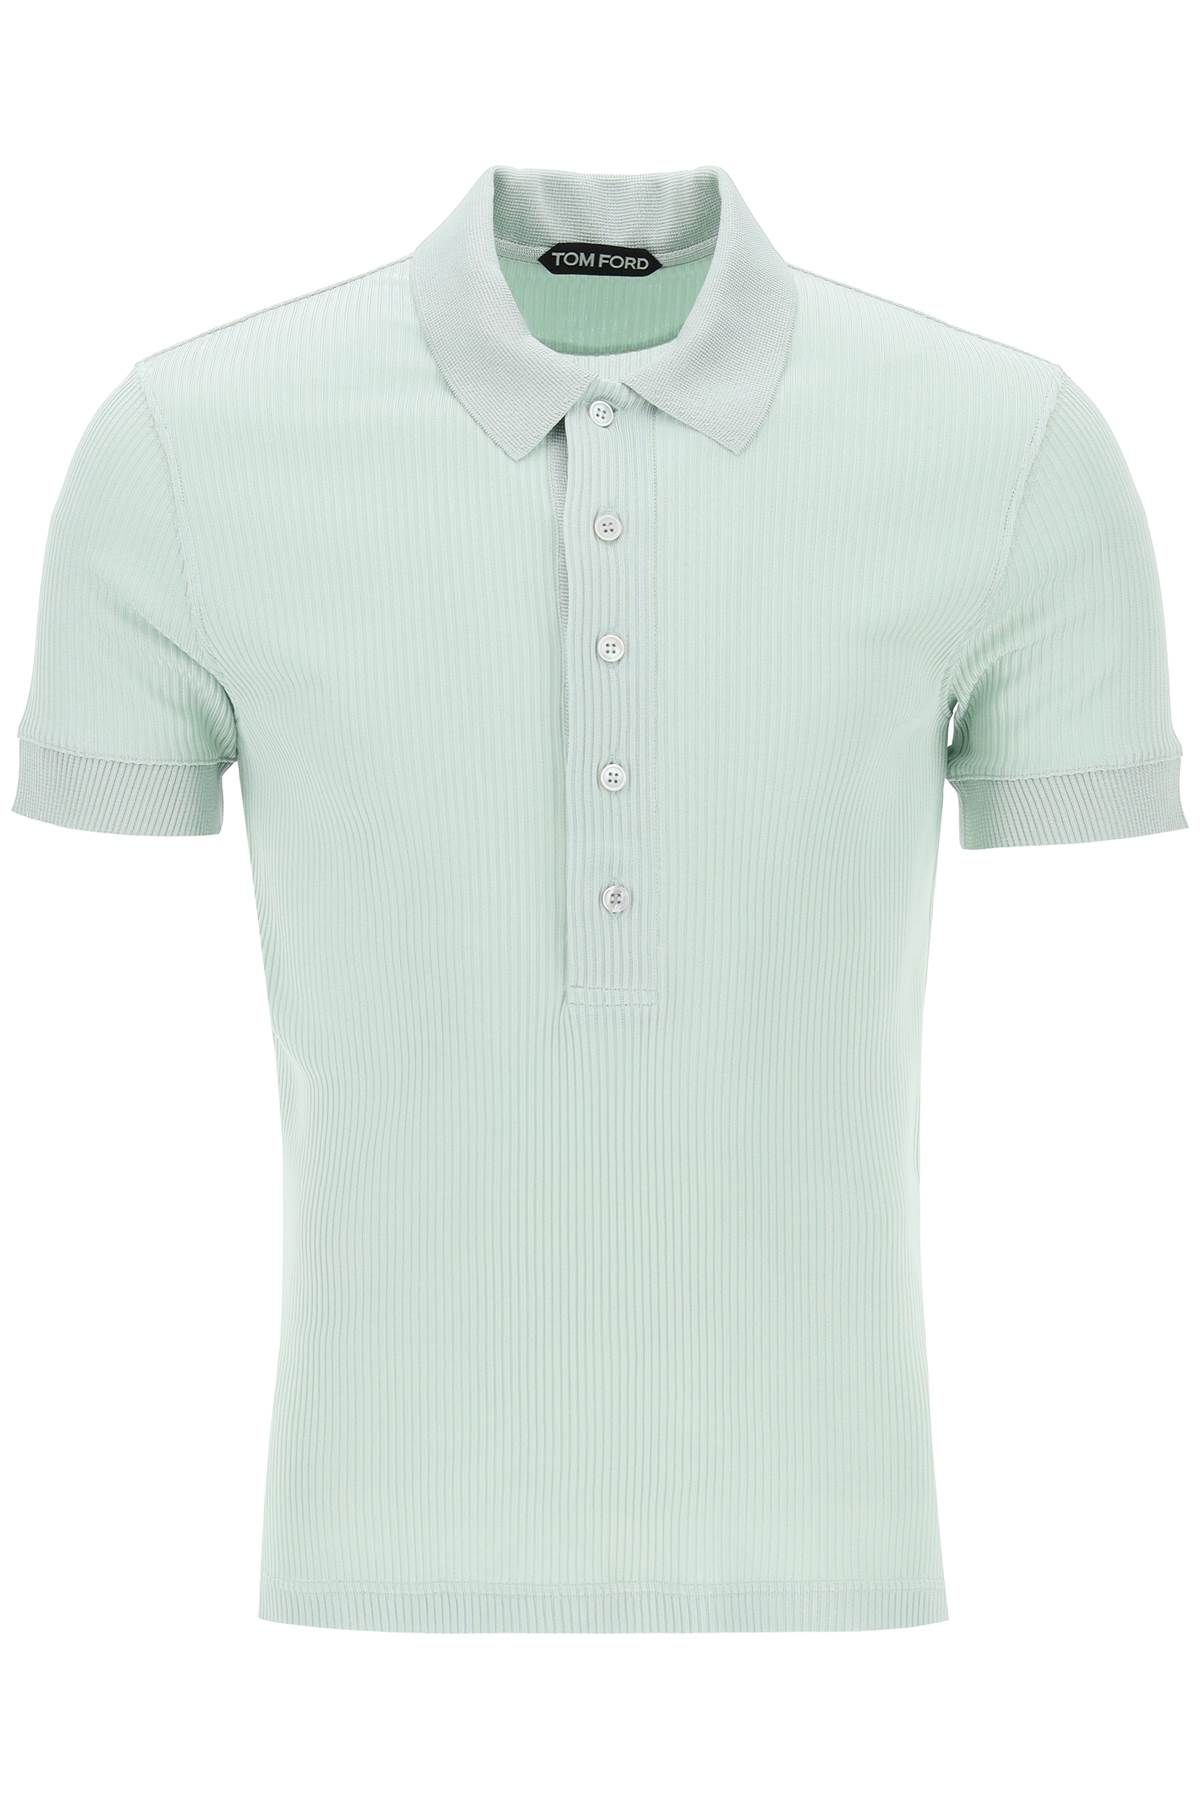 TOM FORD "ribbed knit polo with shiny